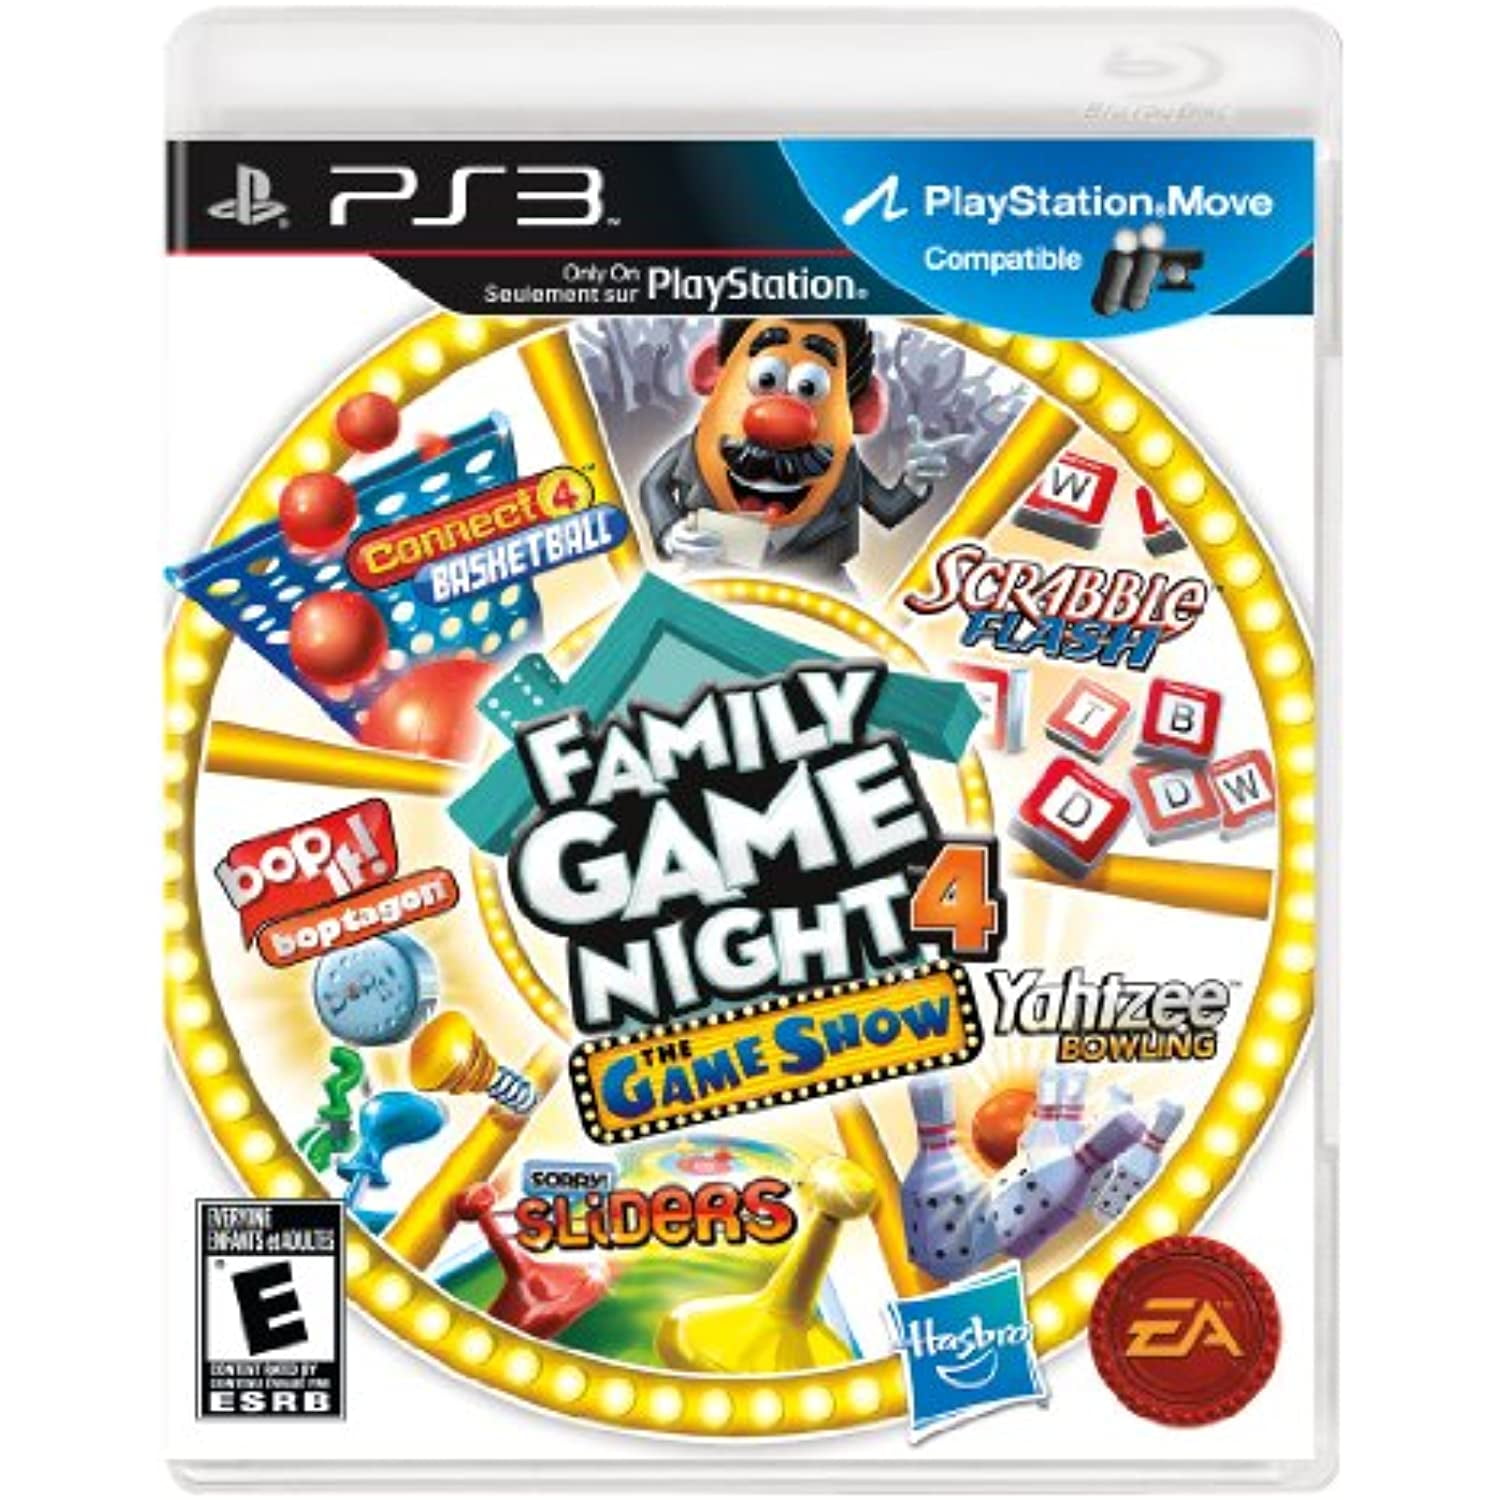 Family games 3. Family game Night 4: the game show. Игры для всей семьи диск. Игры Хасбро. Hasbro Family game Night ps3.